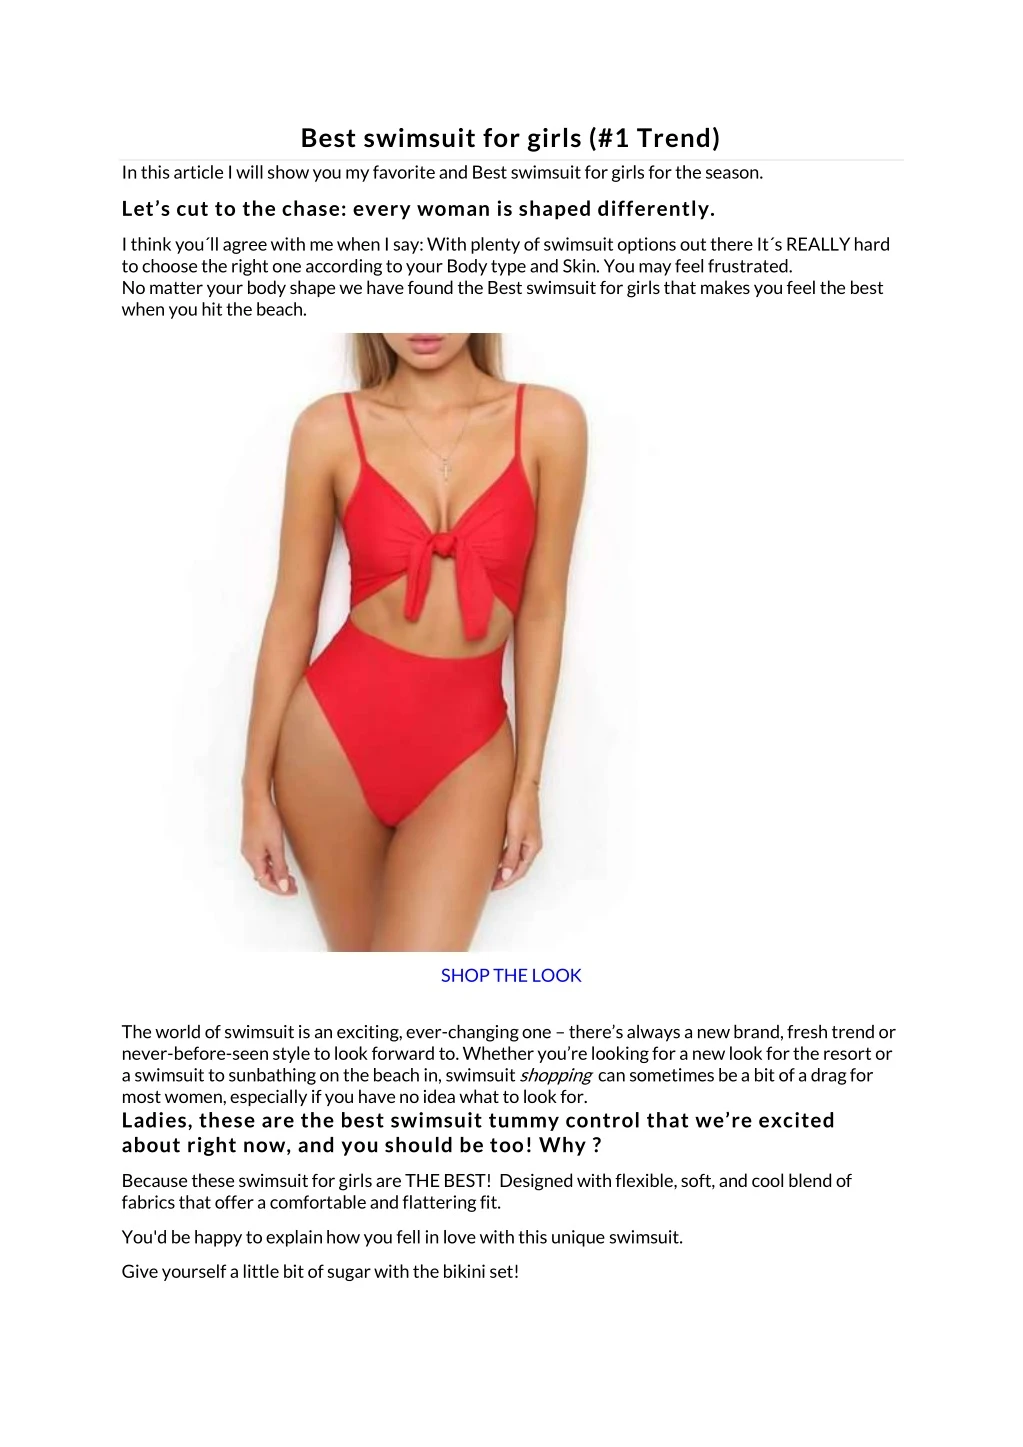 best swimsuit for girls 1 trend in this article